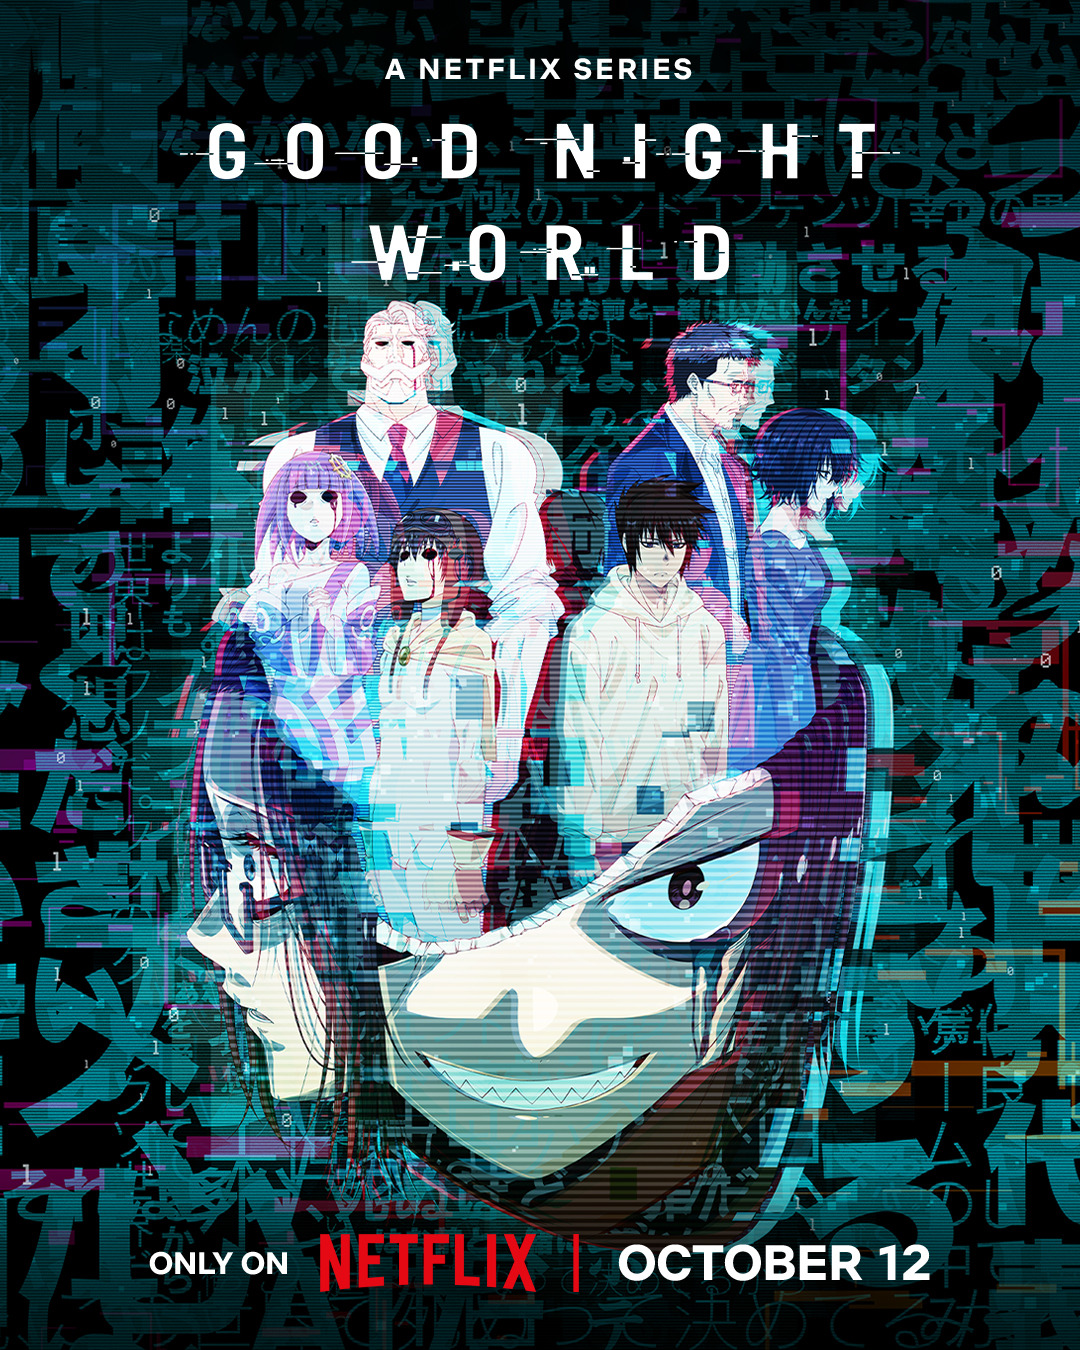 Extra Large TV Poster Image for Good Night World 